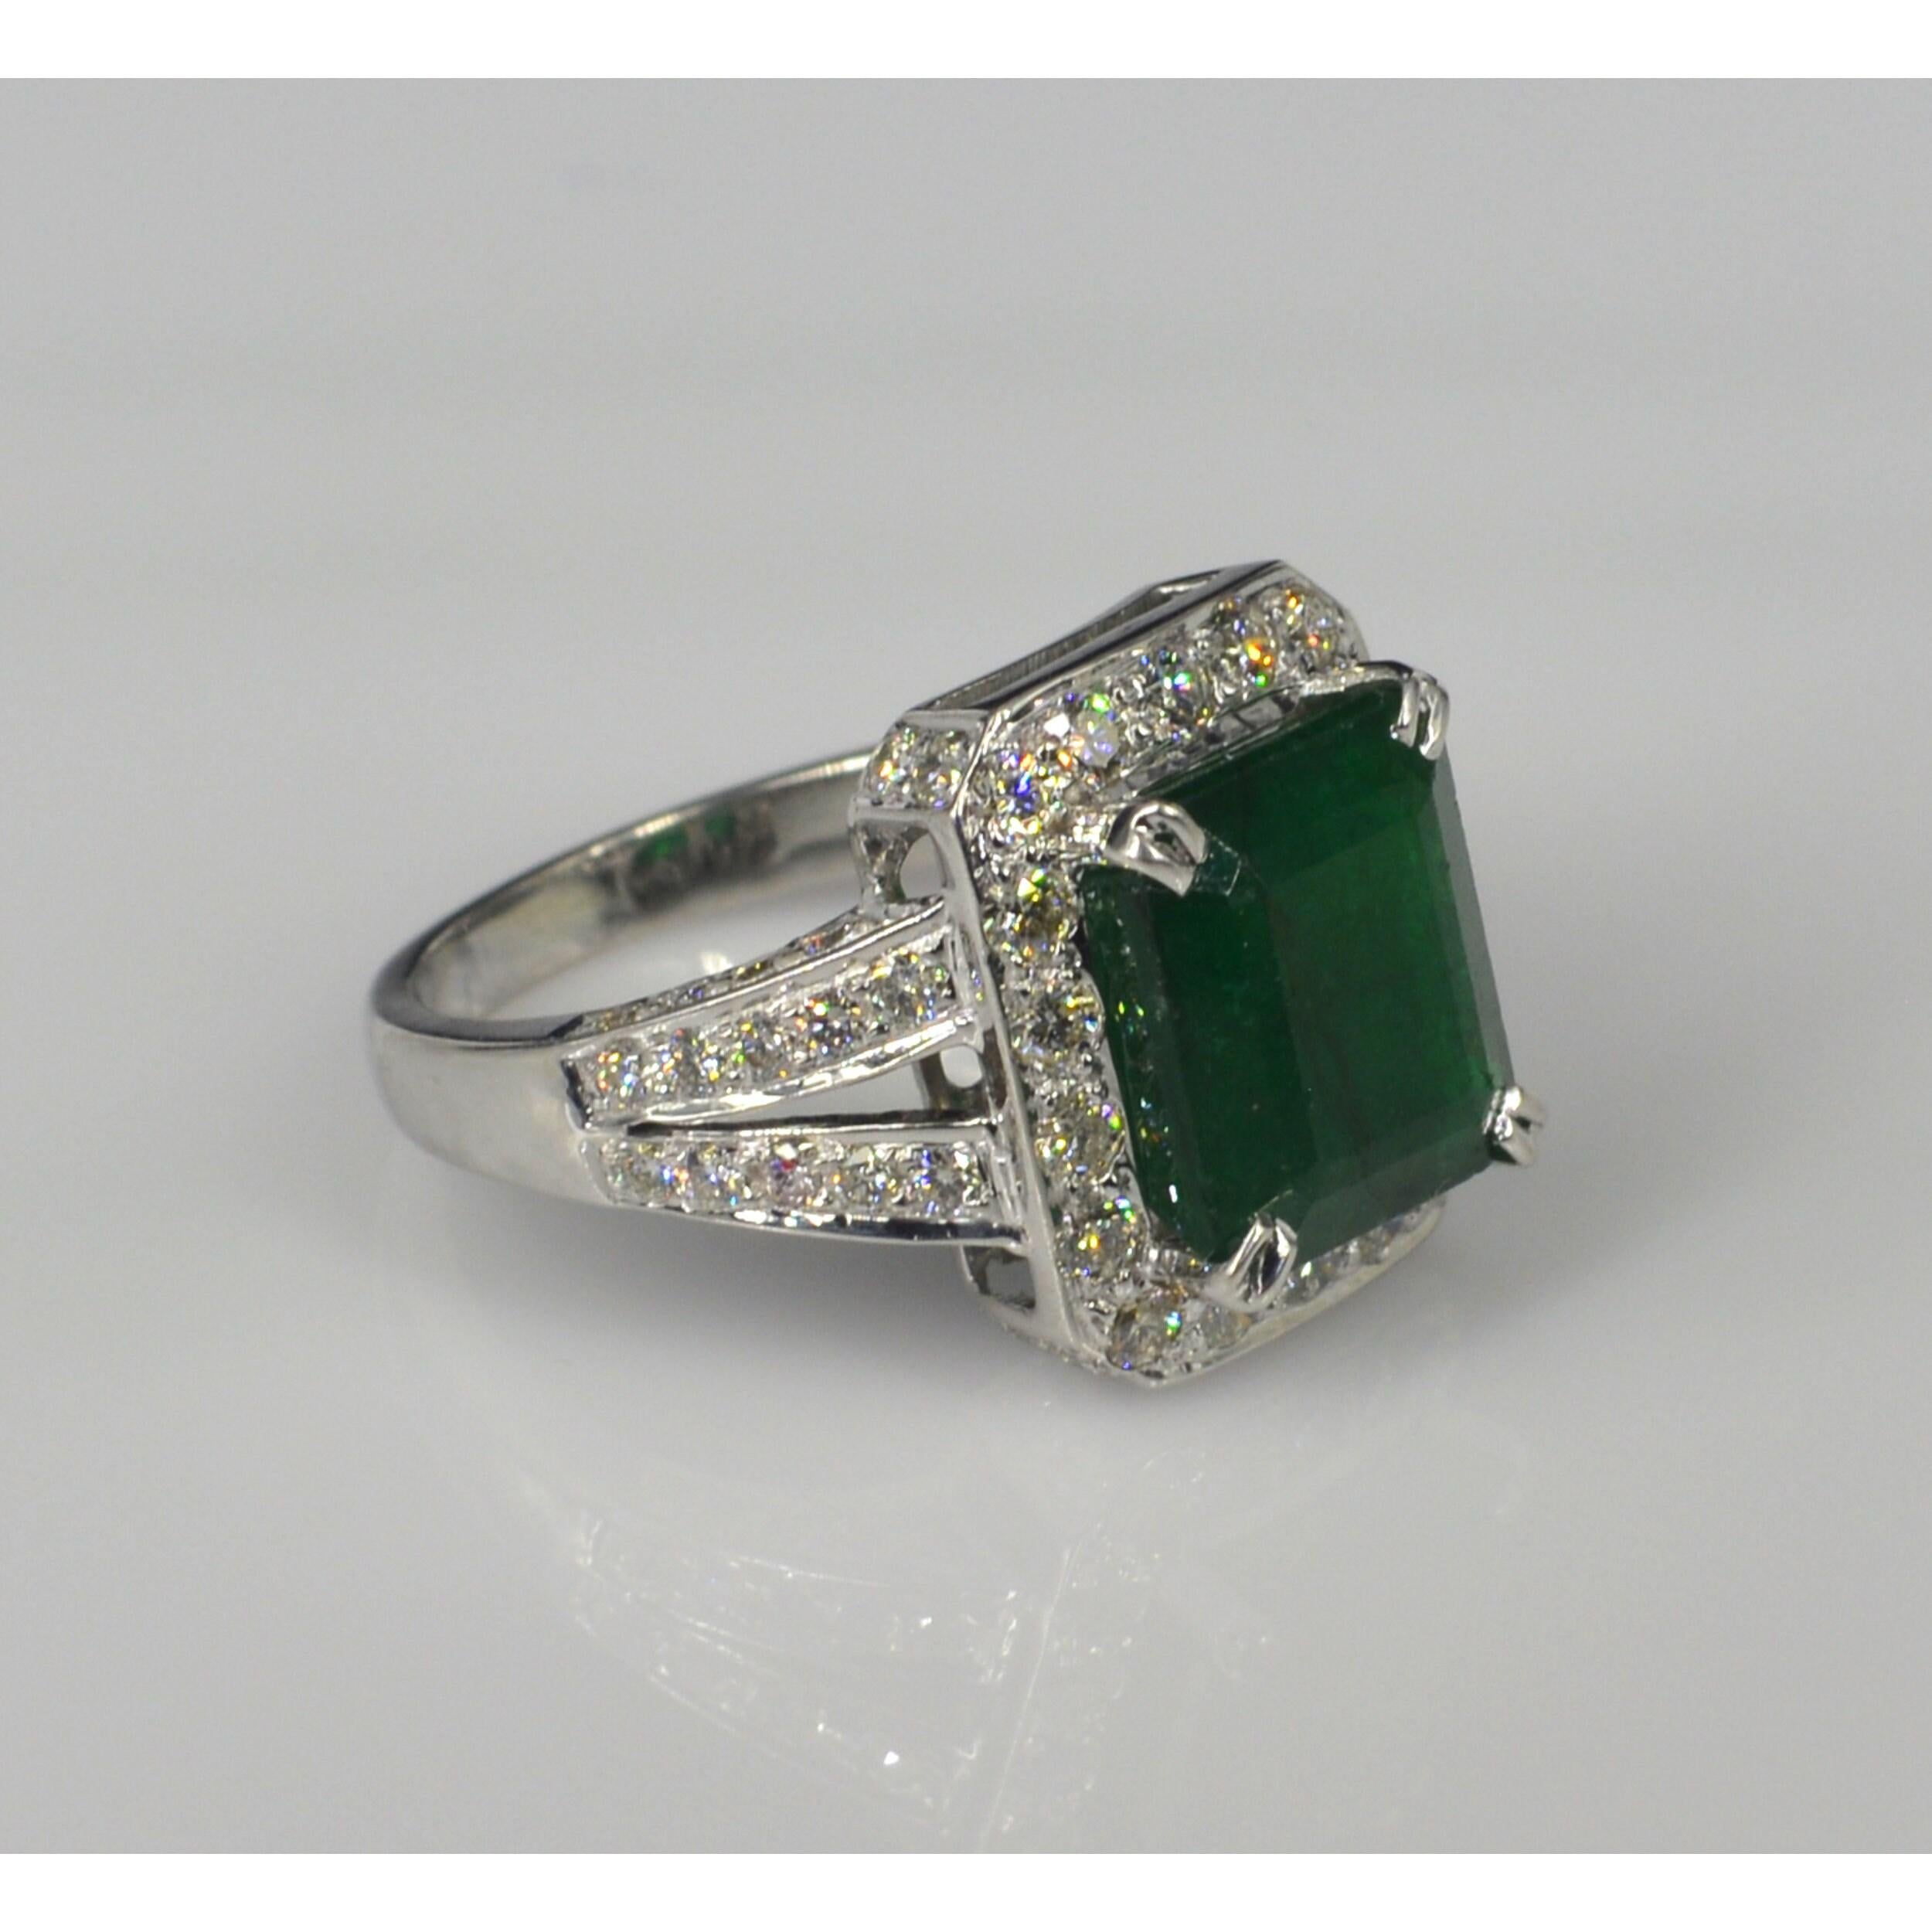 For Sale:  5 Carat Emerald Diamond Engagement Ring, Emerald Statement Ring 6